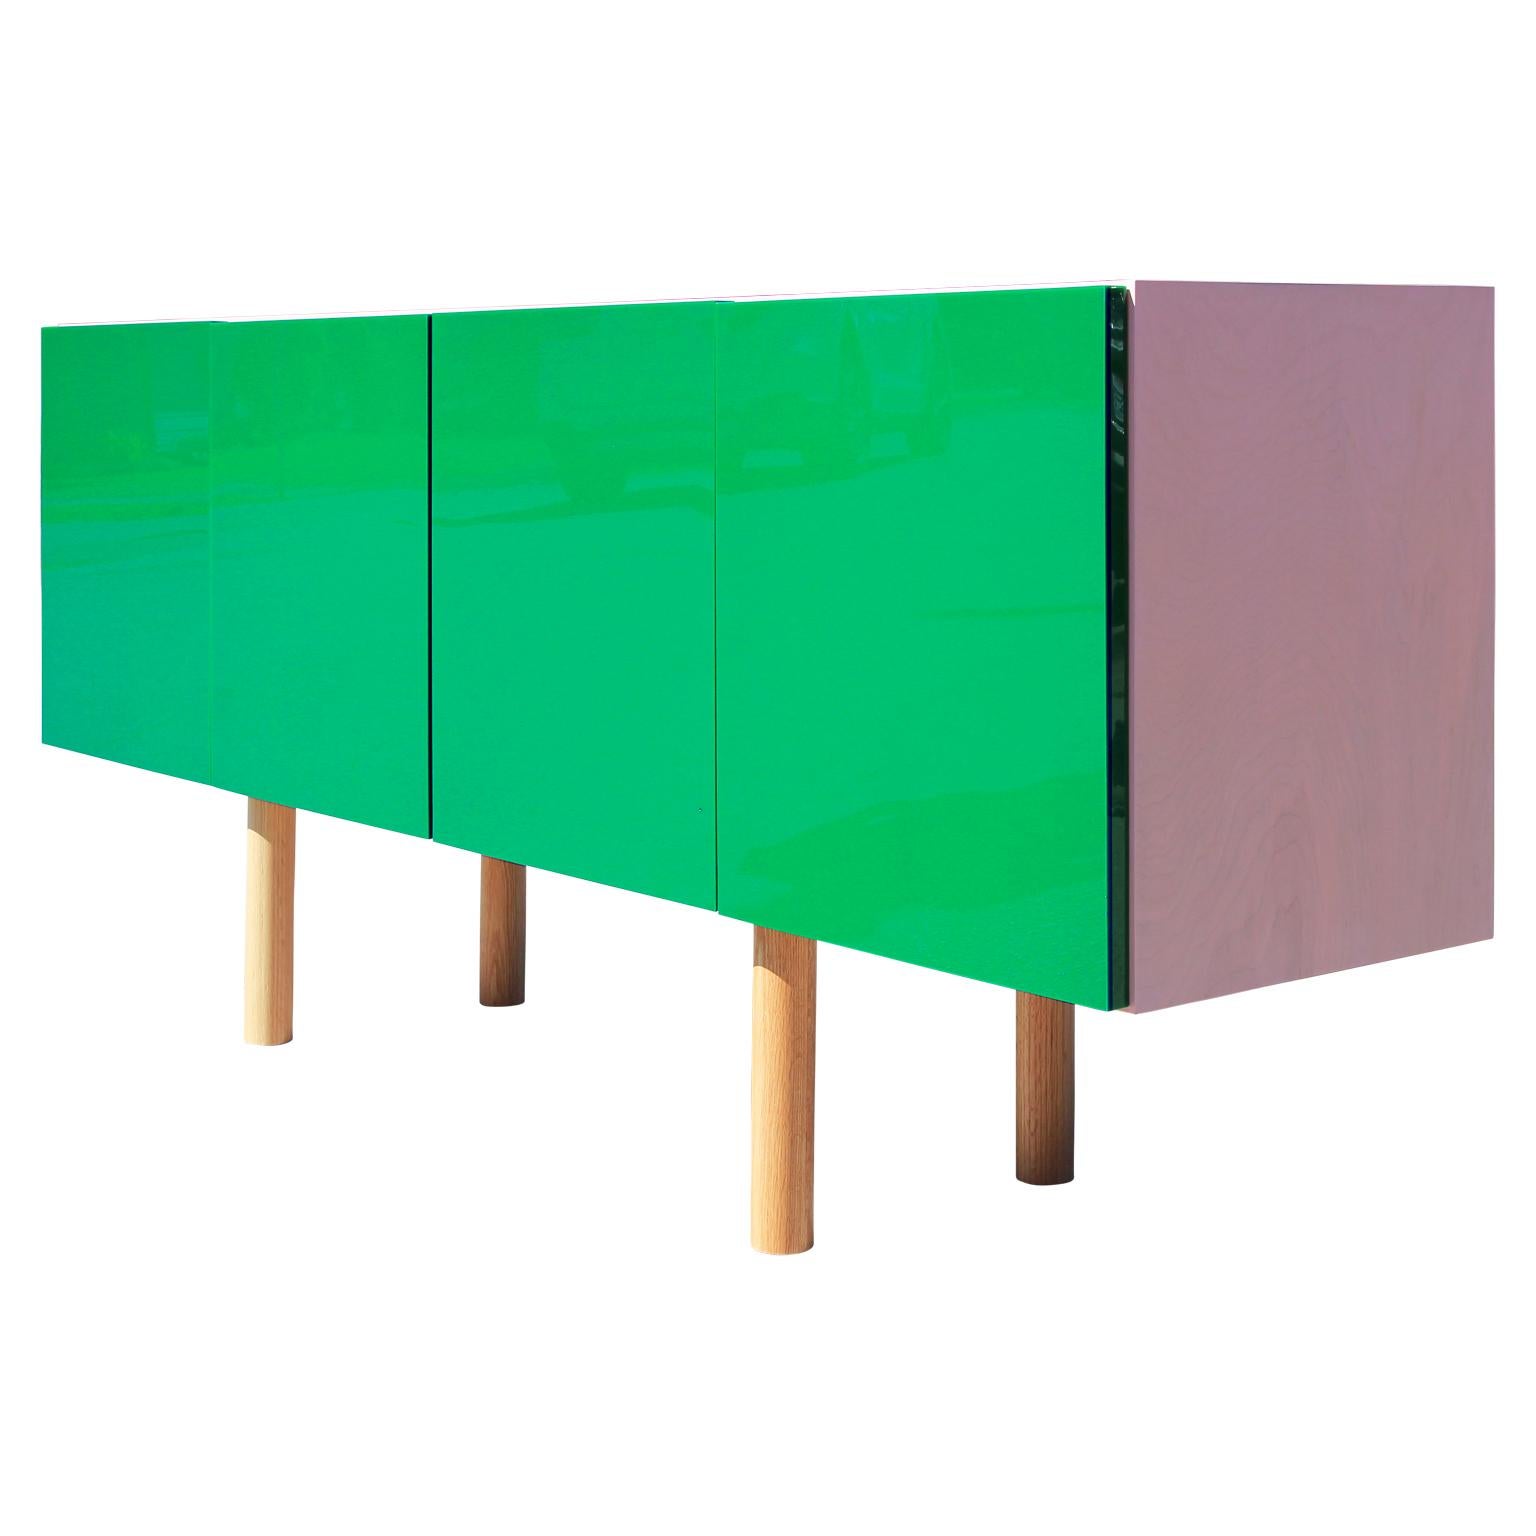 Knockout custom designed handmade contemporary sideboard with green lucite doors with a pink casing. The legs are smoothly turned, creating a clean and sleek appearance.
- Can be made to order in and various finishes and sizes
- Oak